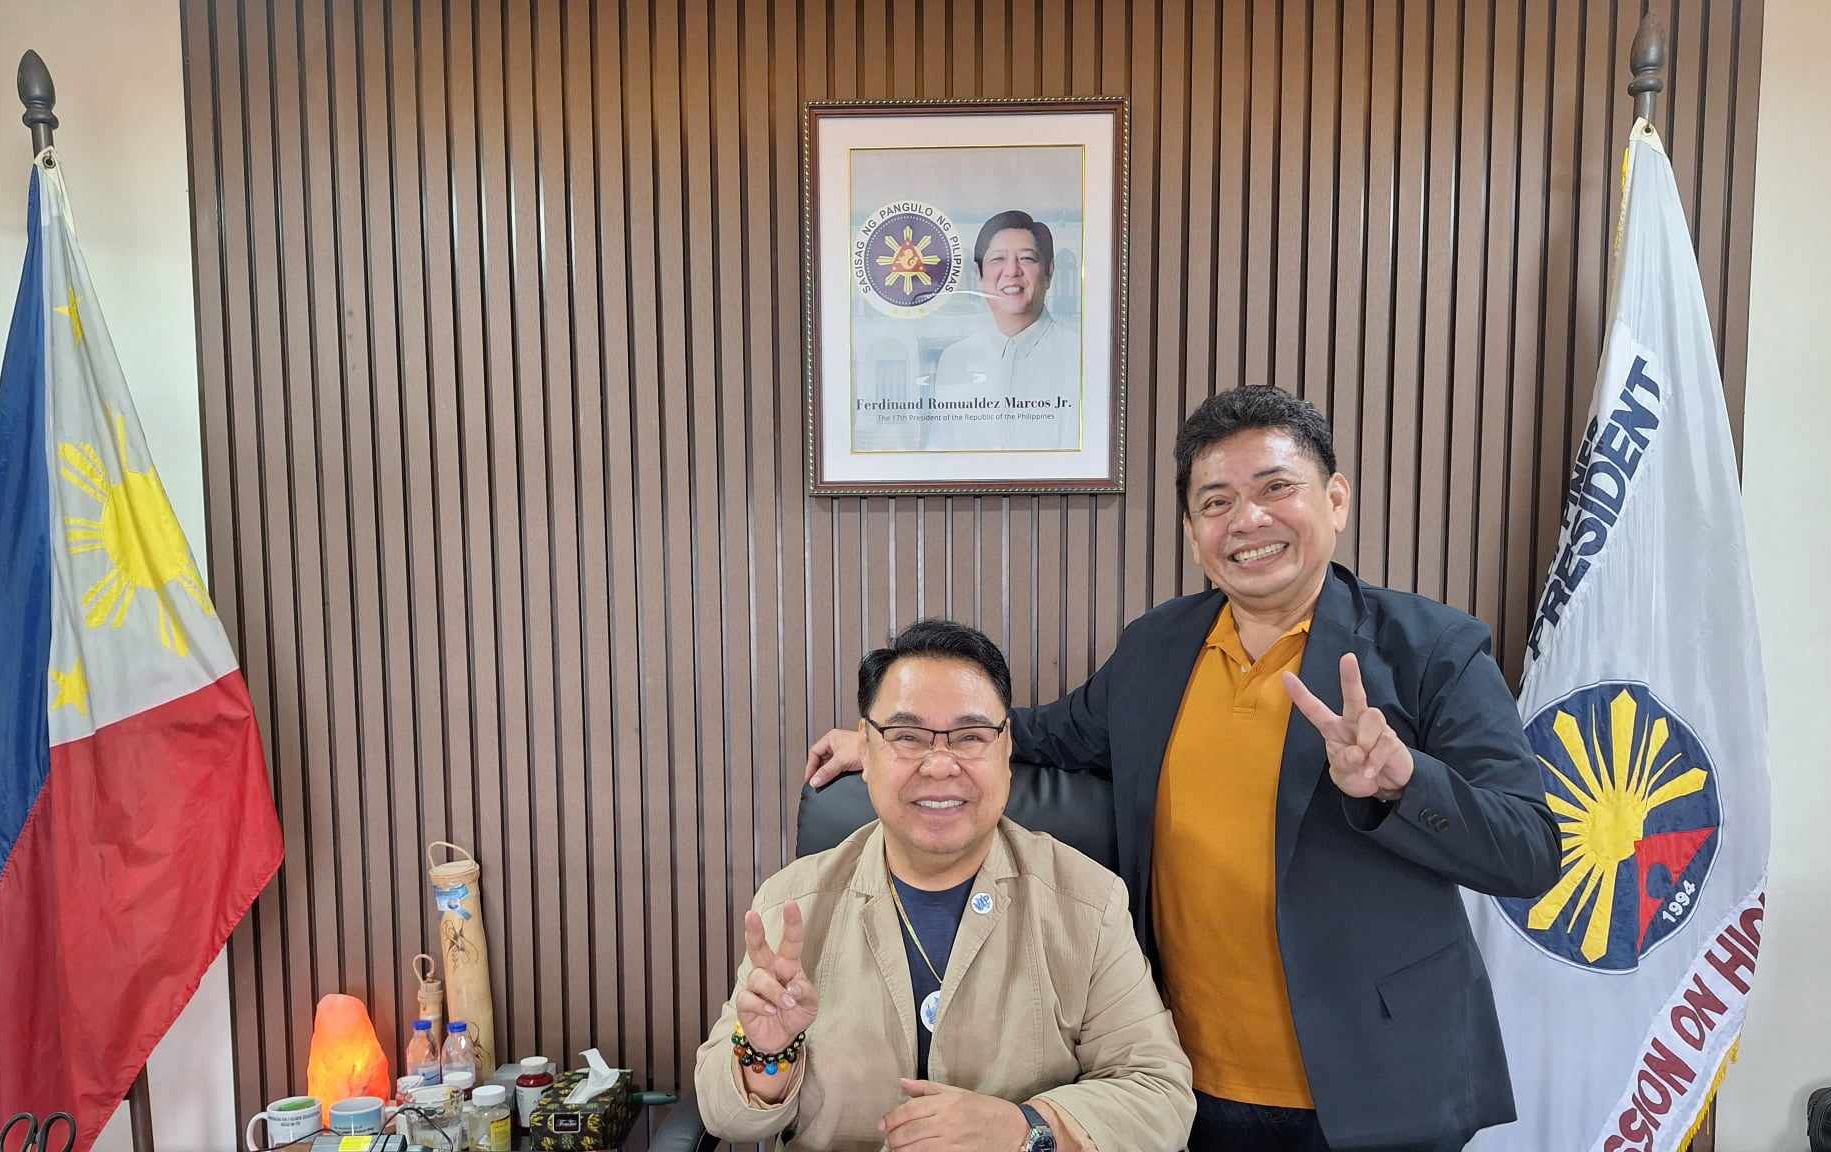 In PHOTOS || Strengthening Institutional Bonds: JHCSC President Rosales Visits Newly Appointed BOT Chair Designate